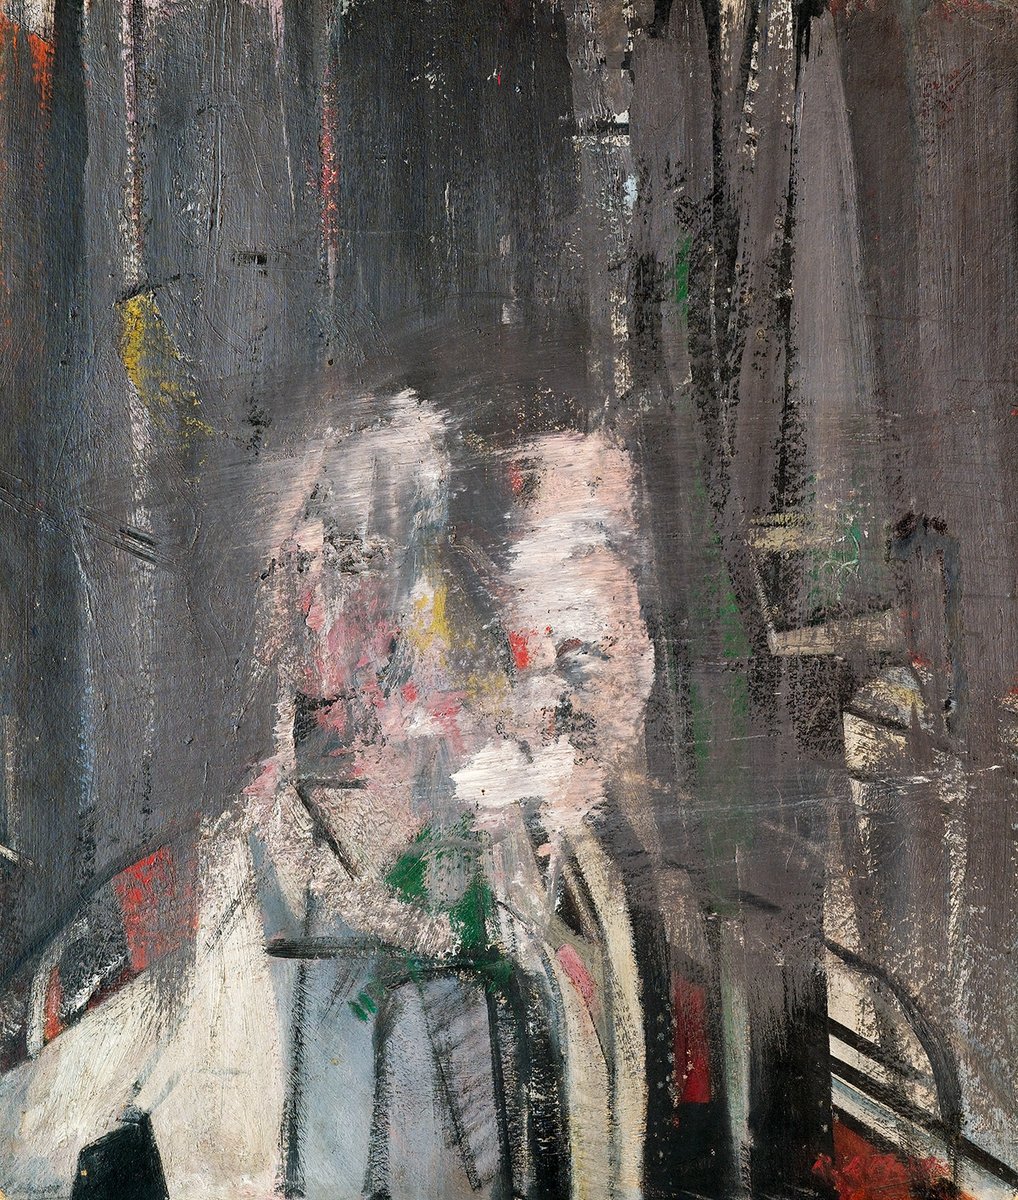 In 1951, 'David Sylvester suggested that Bacon had learned his 'candid camera' technique not from photographs but from the later paintings of Rembrandt.'

Francis Bacon: In Camera, Martin Harrison, pg 61

#francisbacon #fineart #francisbaconartist #insidefrancisbacon